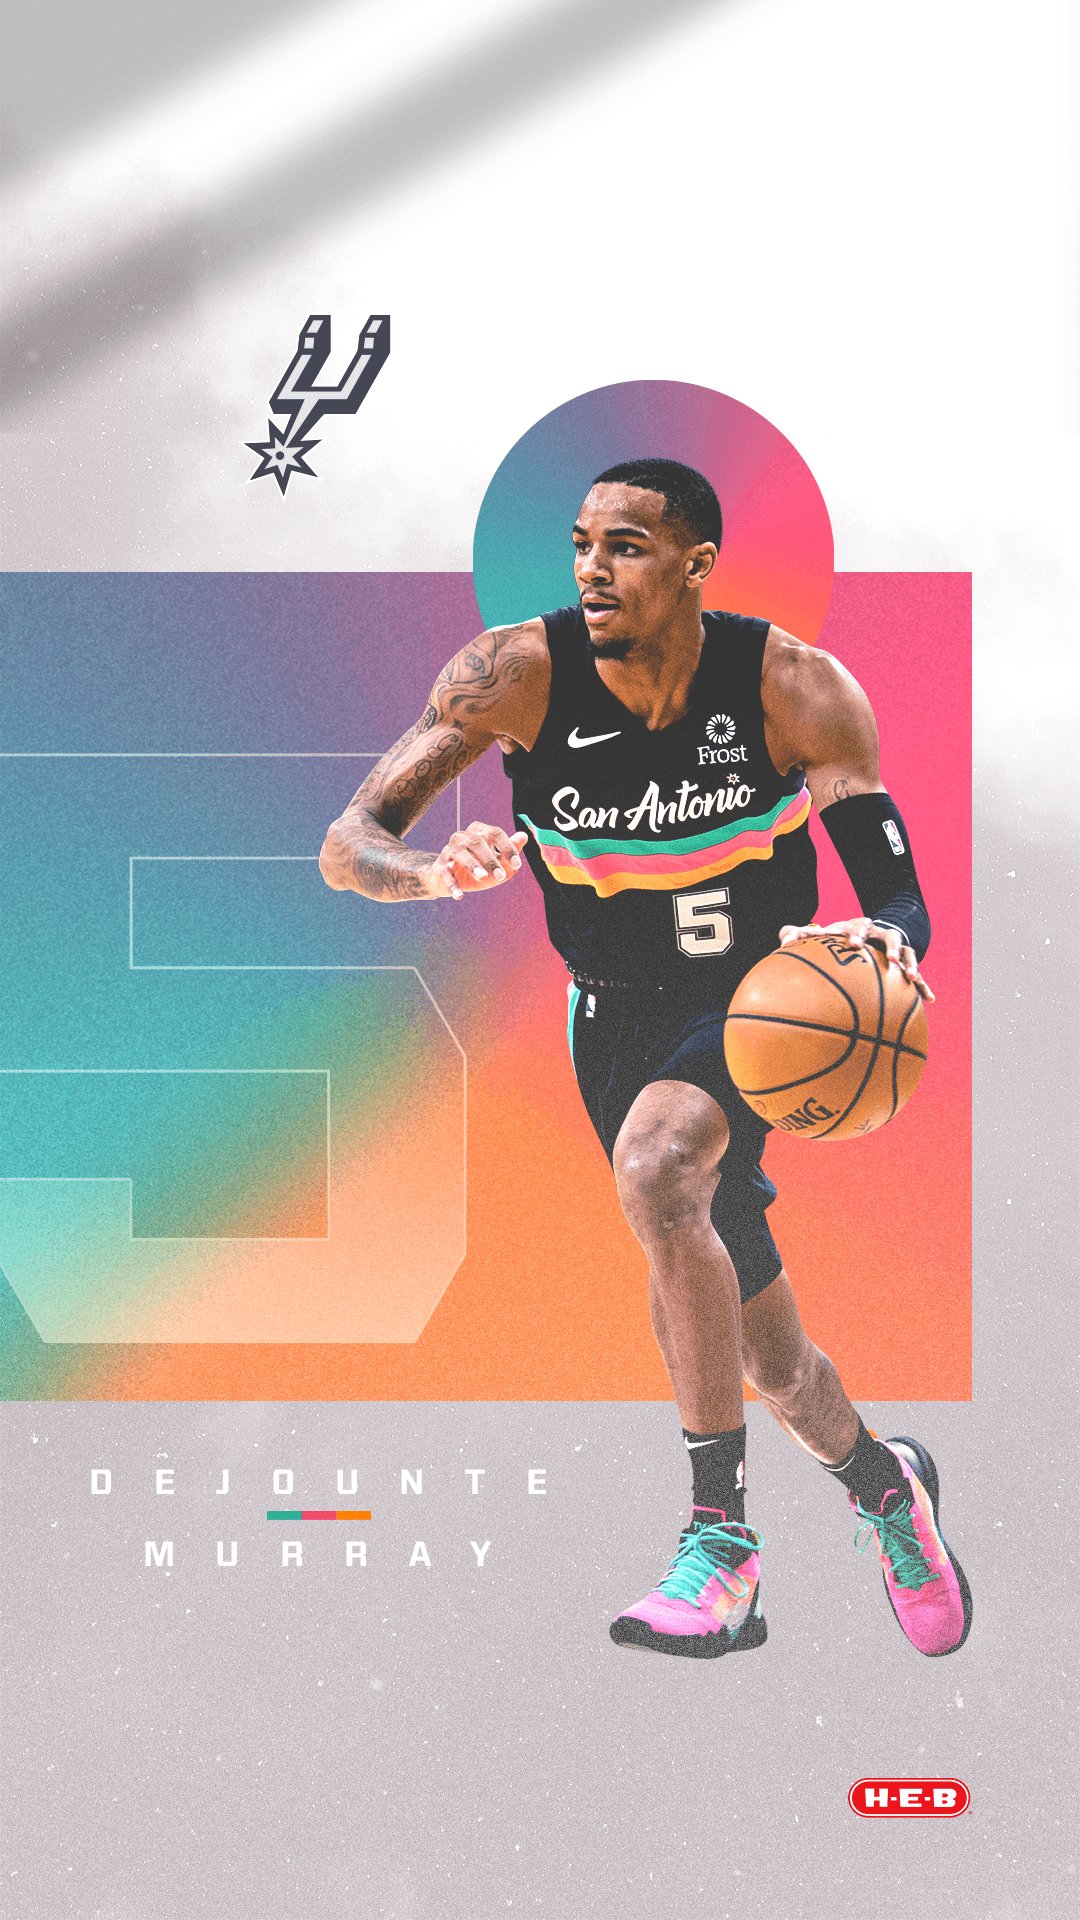 Dejounte Murray Projects  Photos videos logos illustrations and  branding on Behance